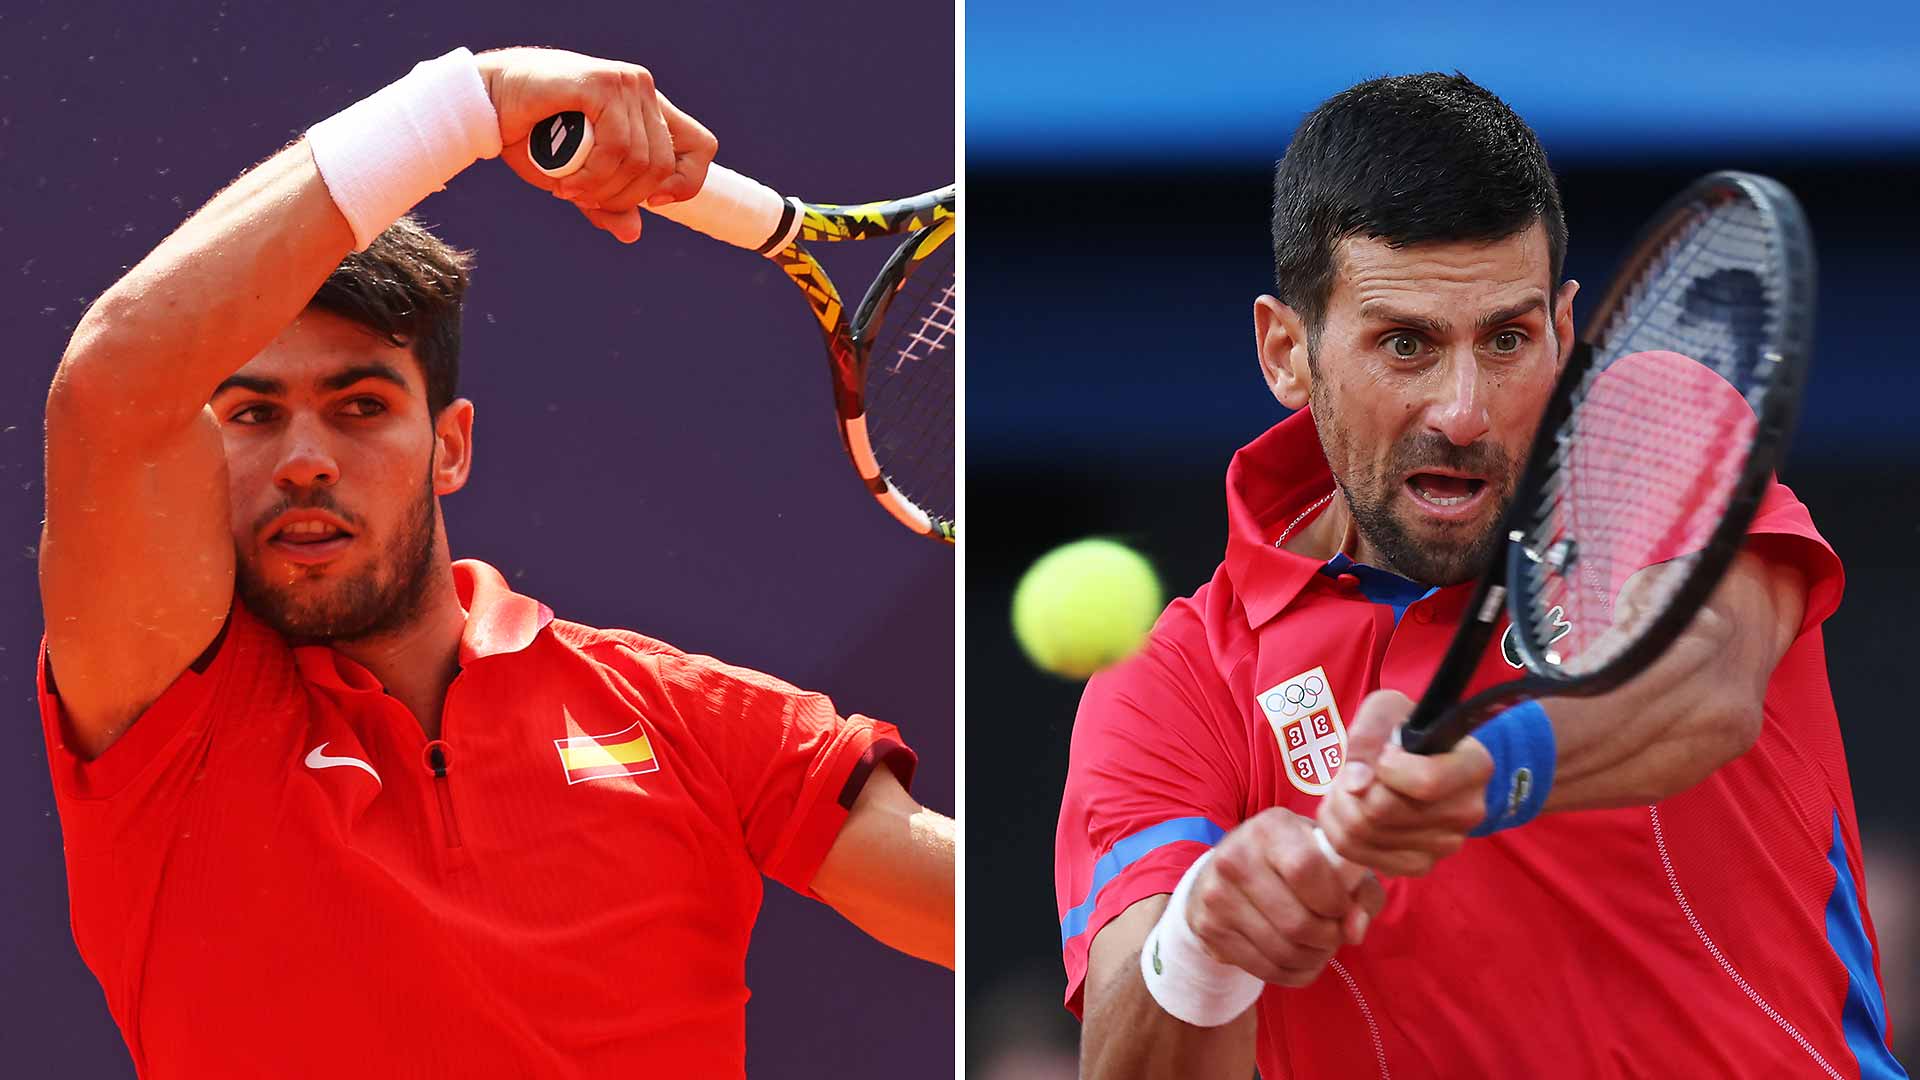 Carlos Alcaraz and Novak Djokovic will meet for the seventh time in Sunday's men's singles final at the Olympic Tennis Event in Paris.